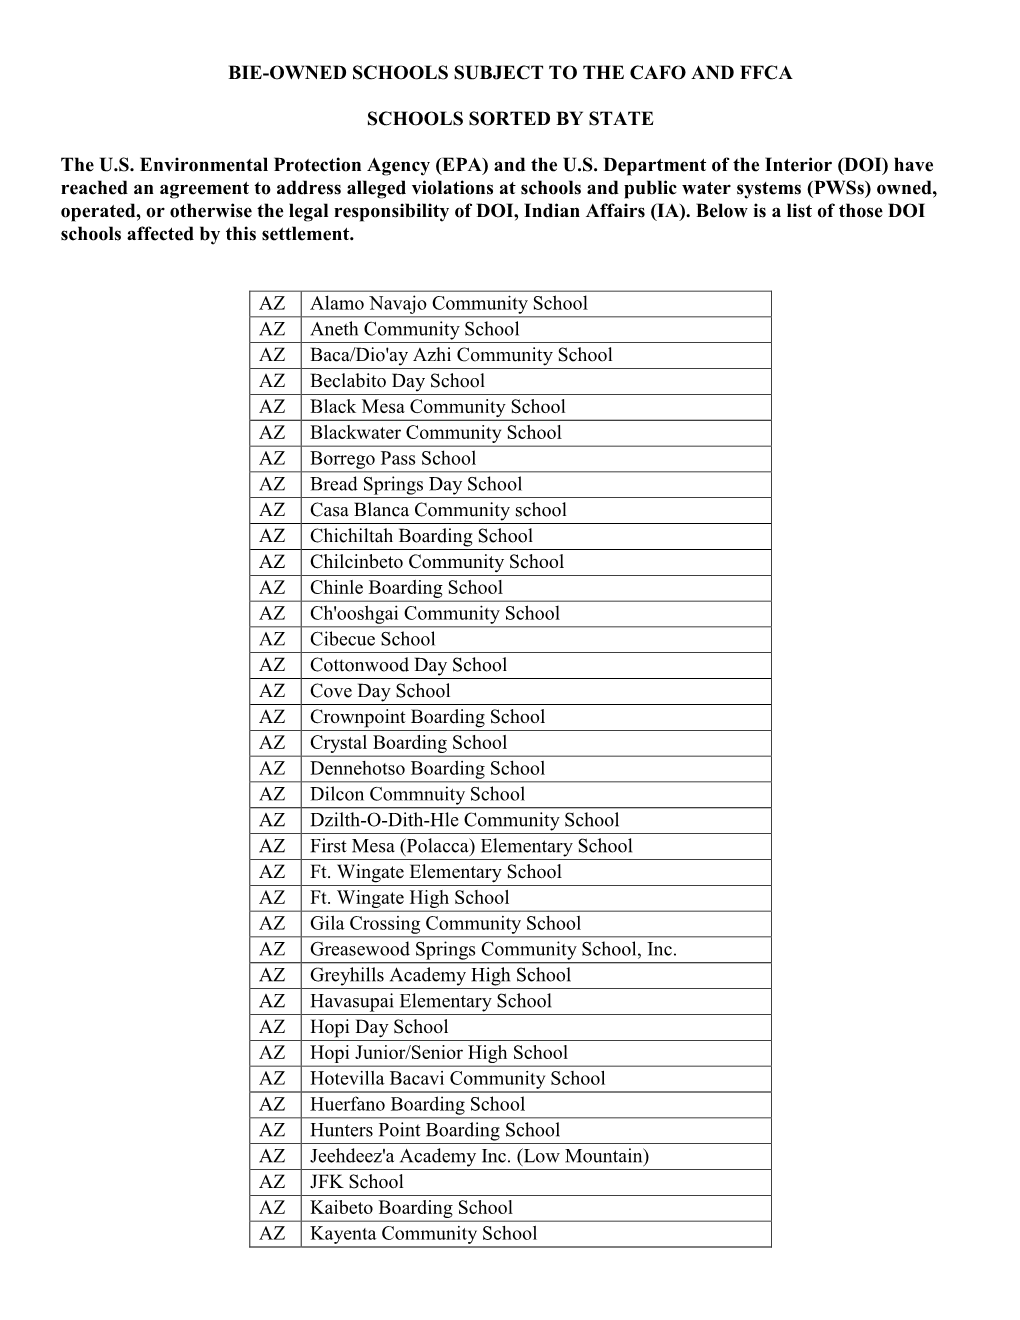 List of BIE Schools and BIA Public Water Systems Covered by The